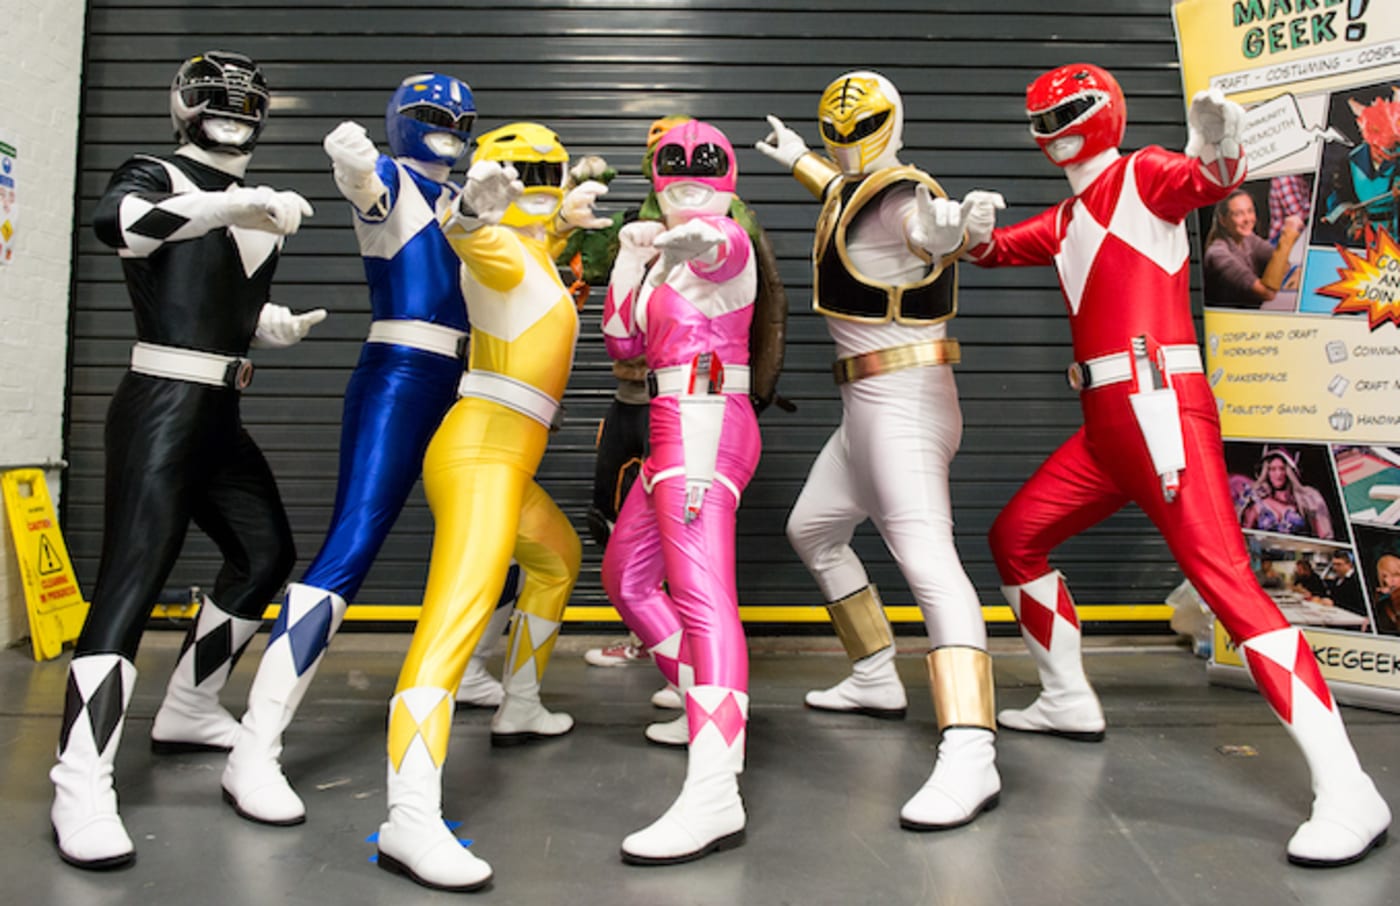 A Power Rangers cosplayer group seen in character during London Film and Comic Con 2019.